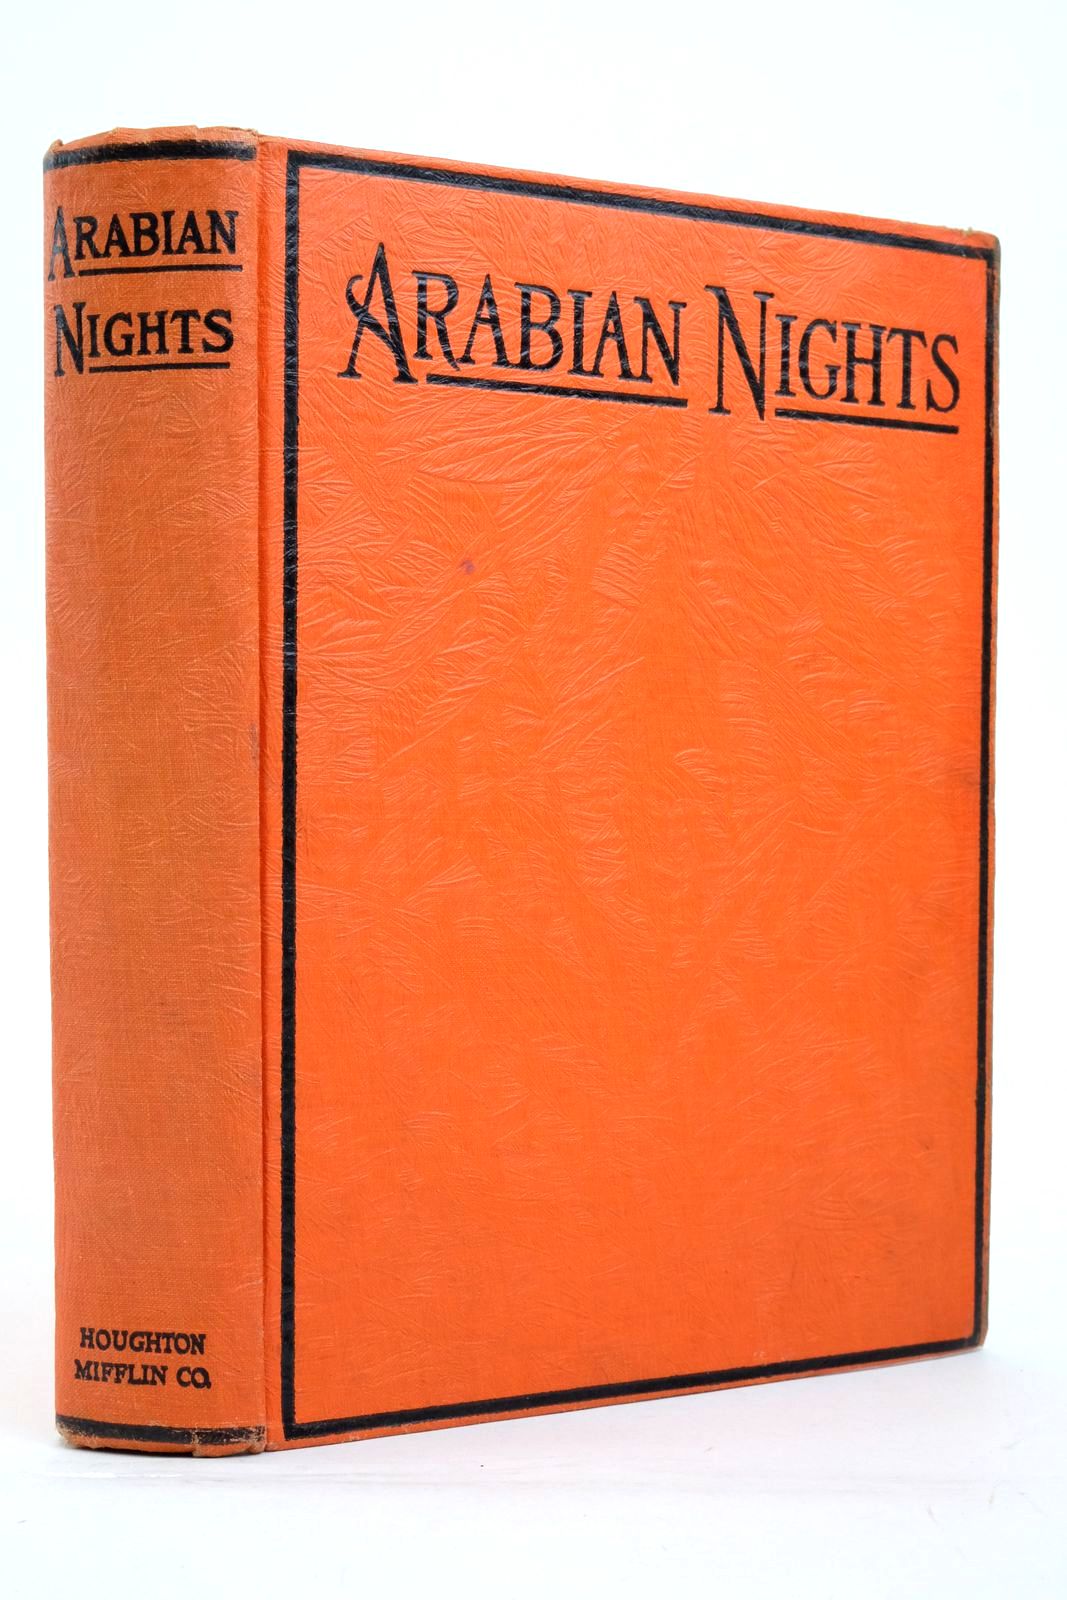 Photo of THE ARABIAN NIGHTS' ENTERTAINMENTS written by Rich, Edwin Gile illustrated by Hussar, Lacy published by Houghton Mifflin Company (STOCK CODE: 2137763)  for sale by Stella & Rose's Books